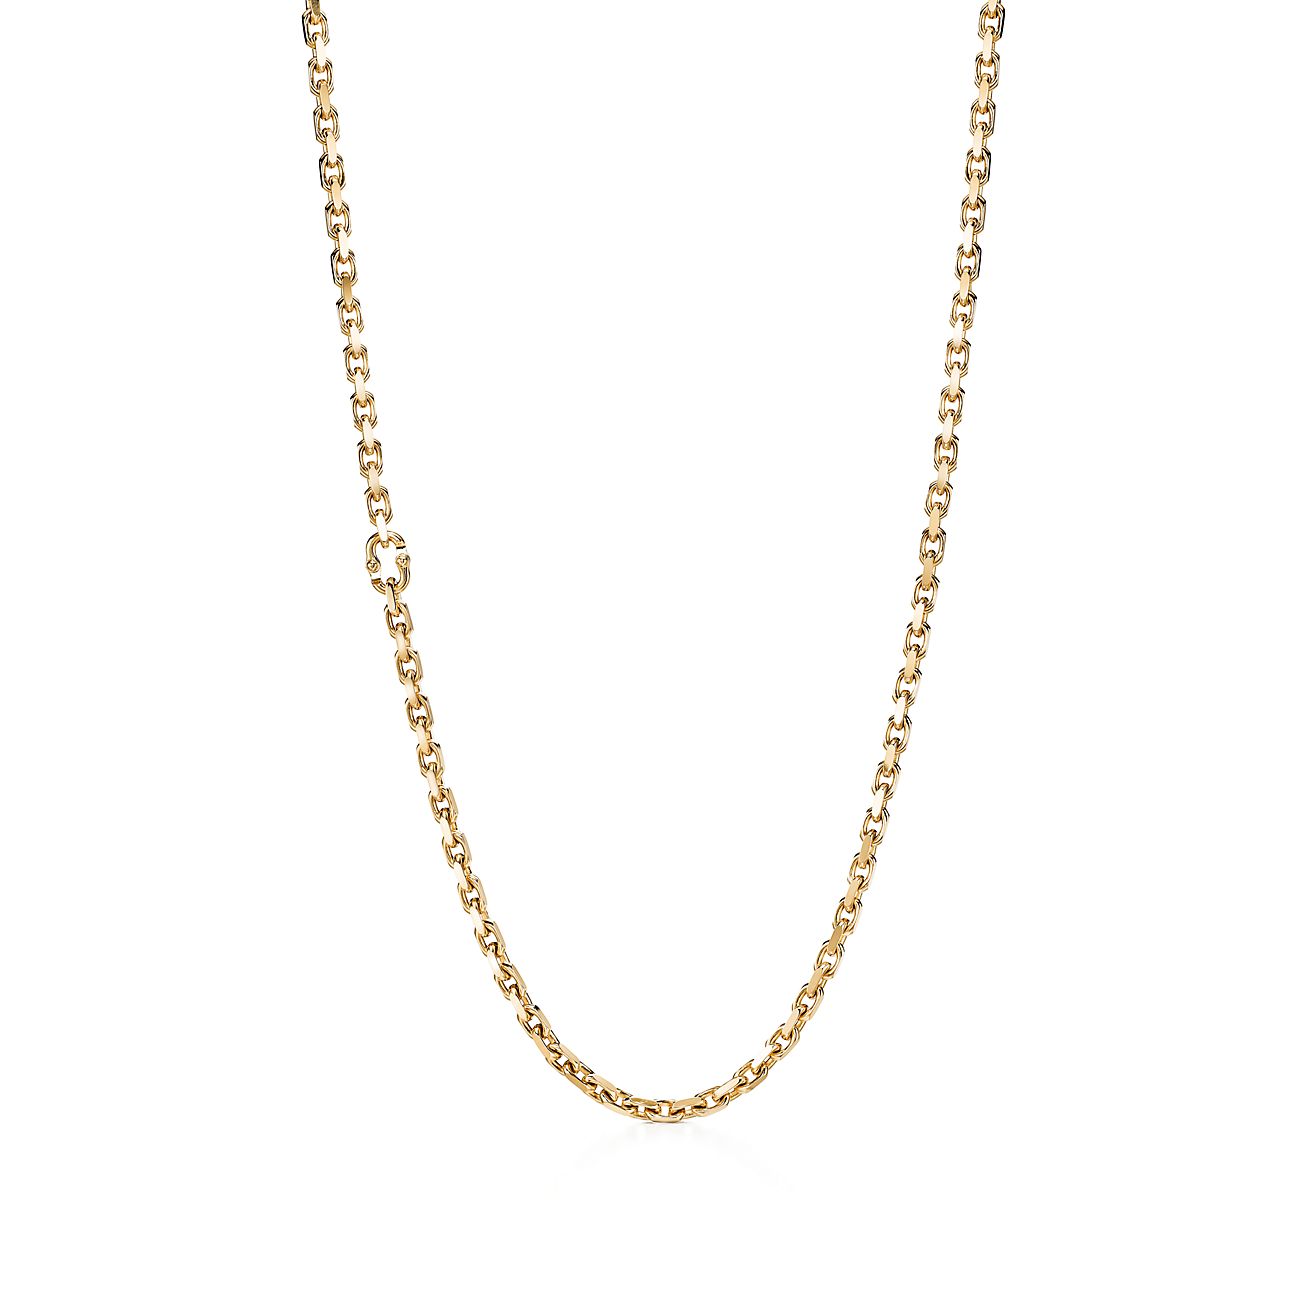 Tiffany 1837 Makers Chain Necklace